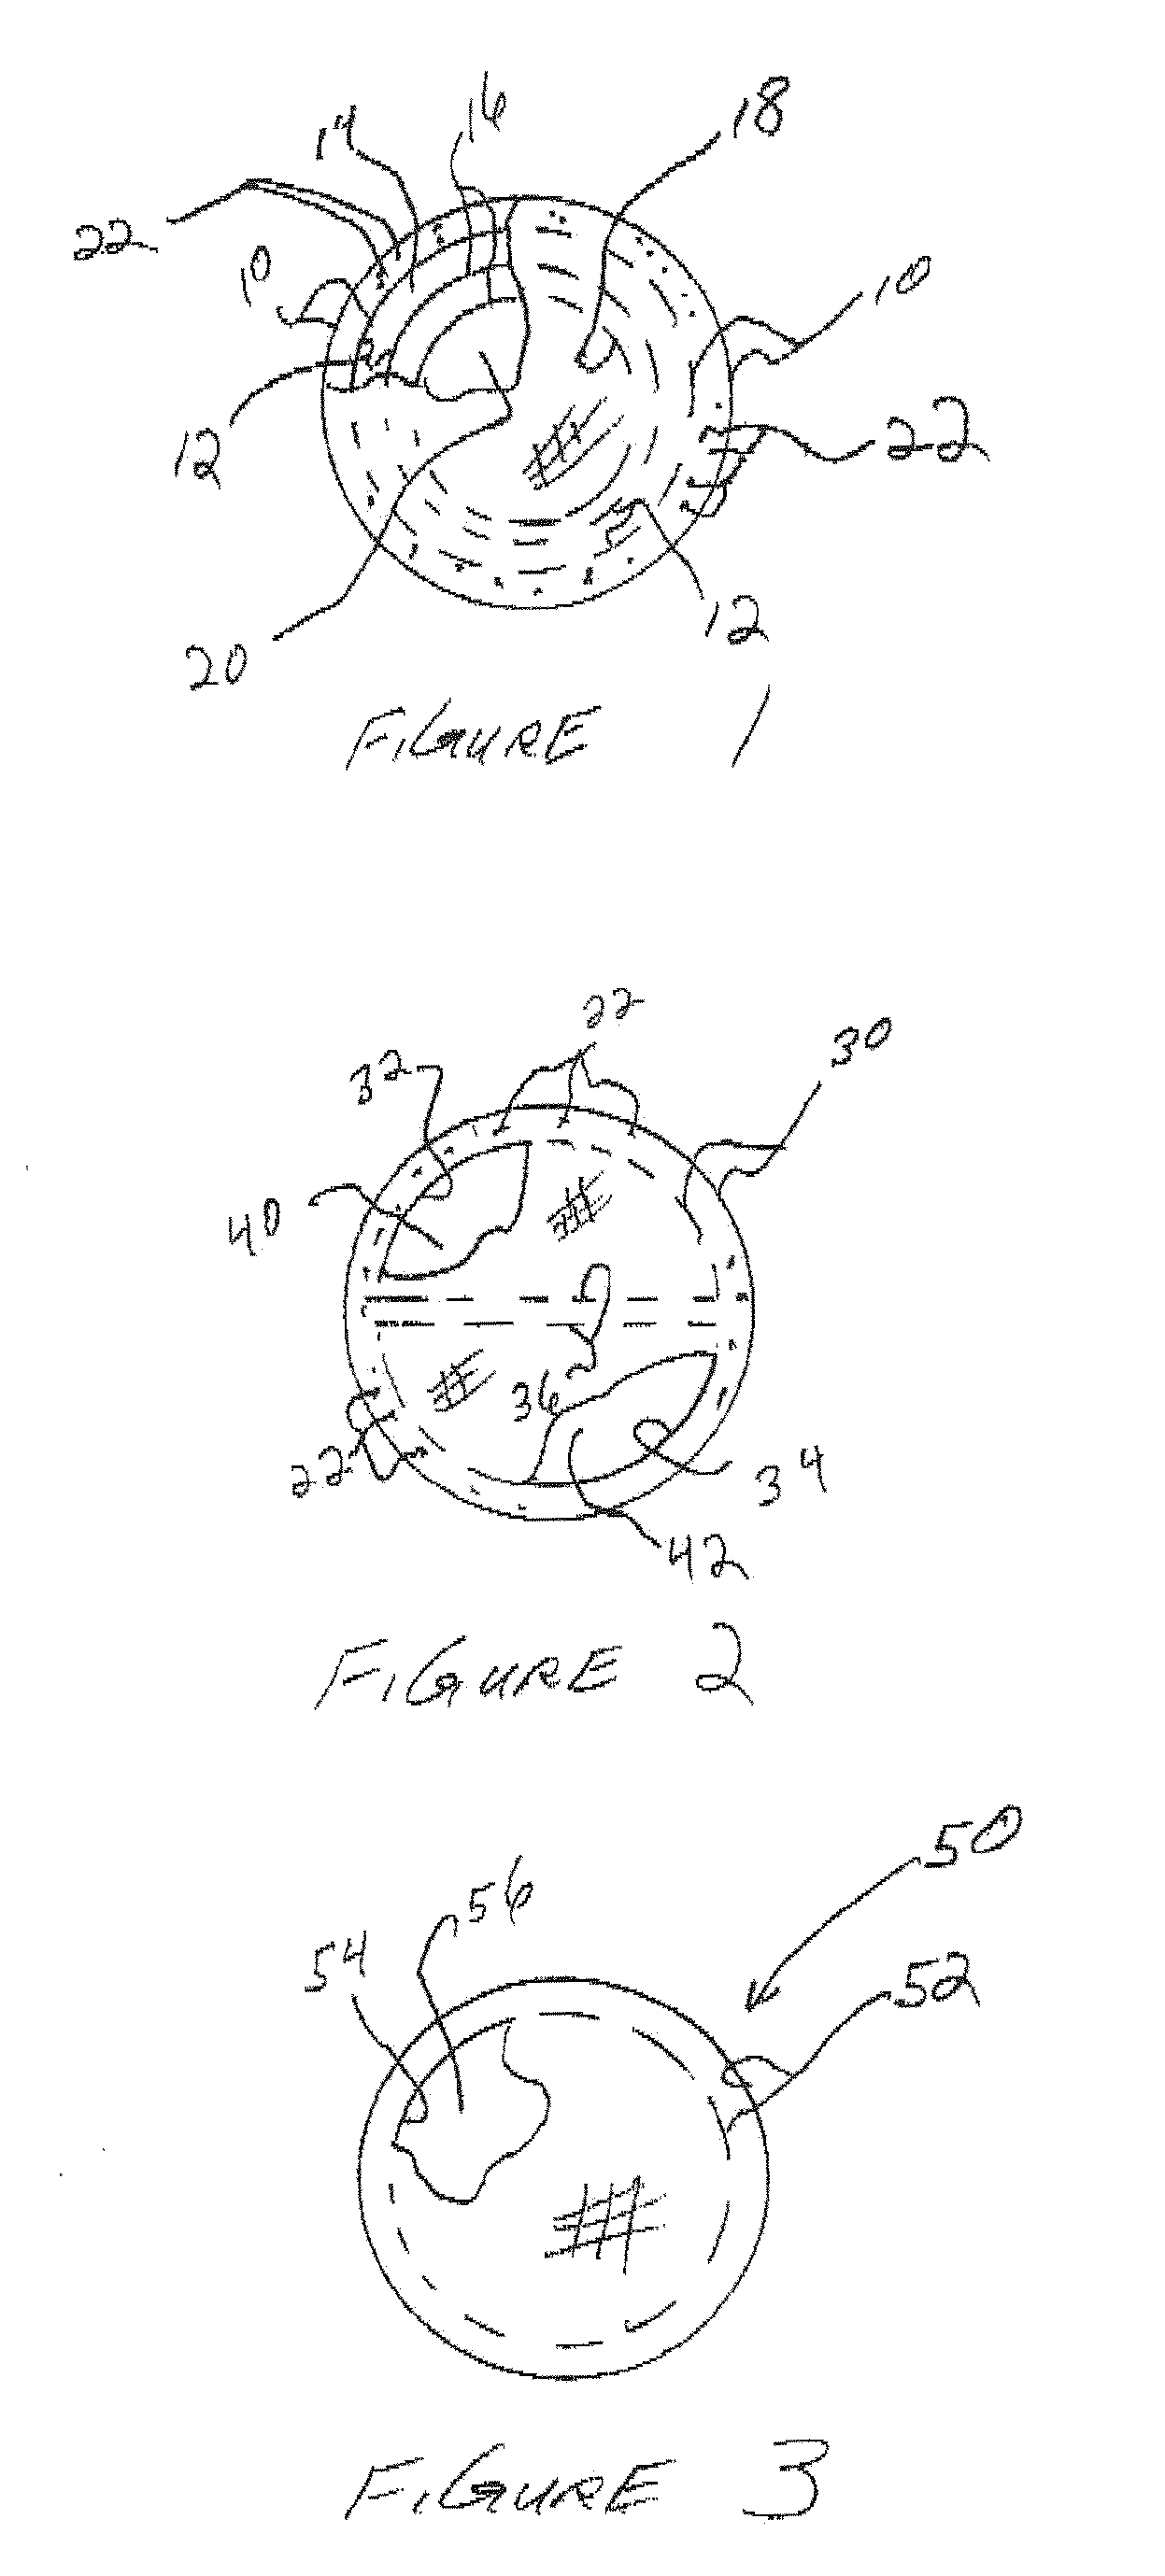 Water based paintall and method for fabricating water based paintballs